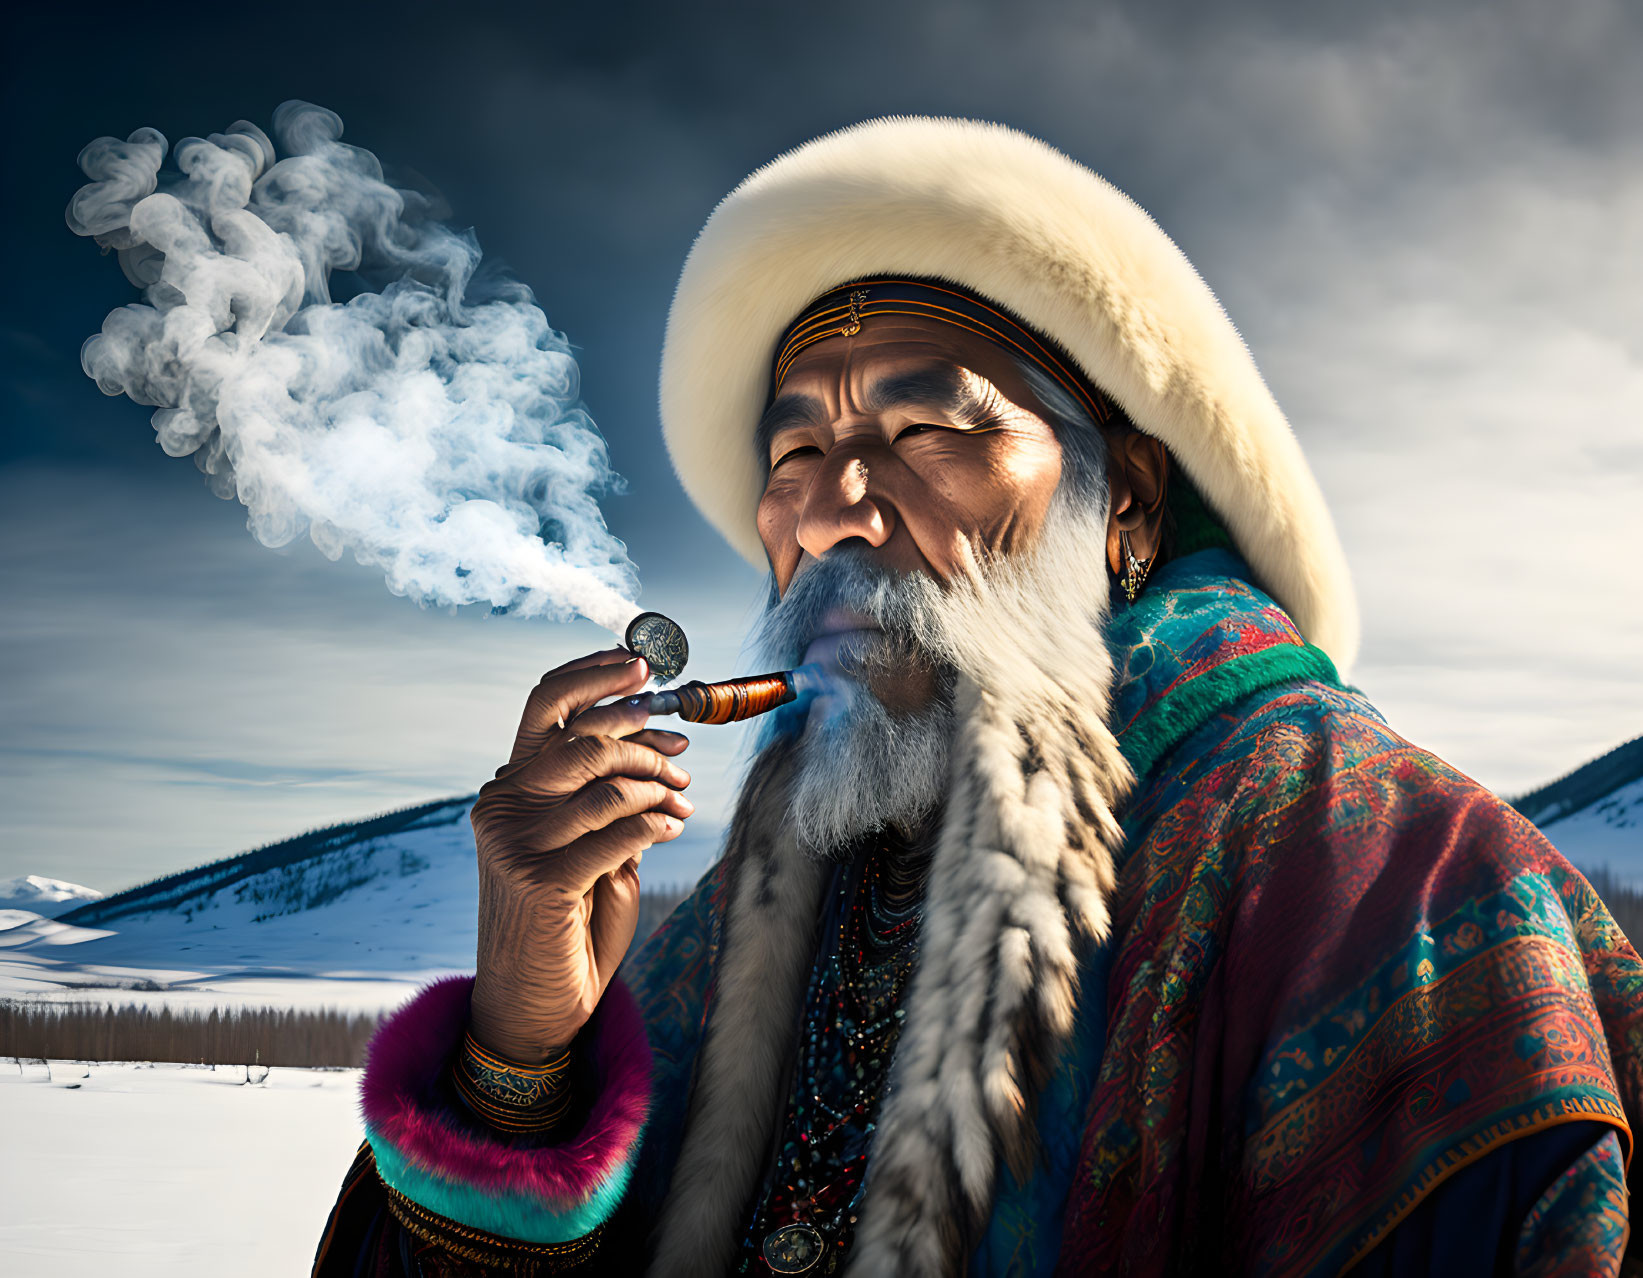 Elderly person in traditional attire smoking a pipe against snowy mountains and clear sky